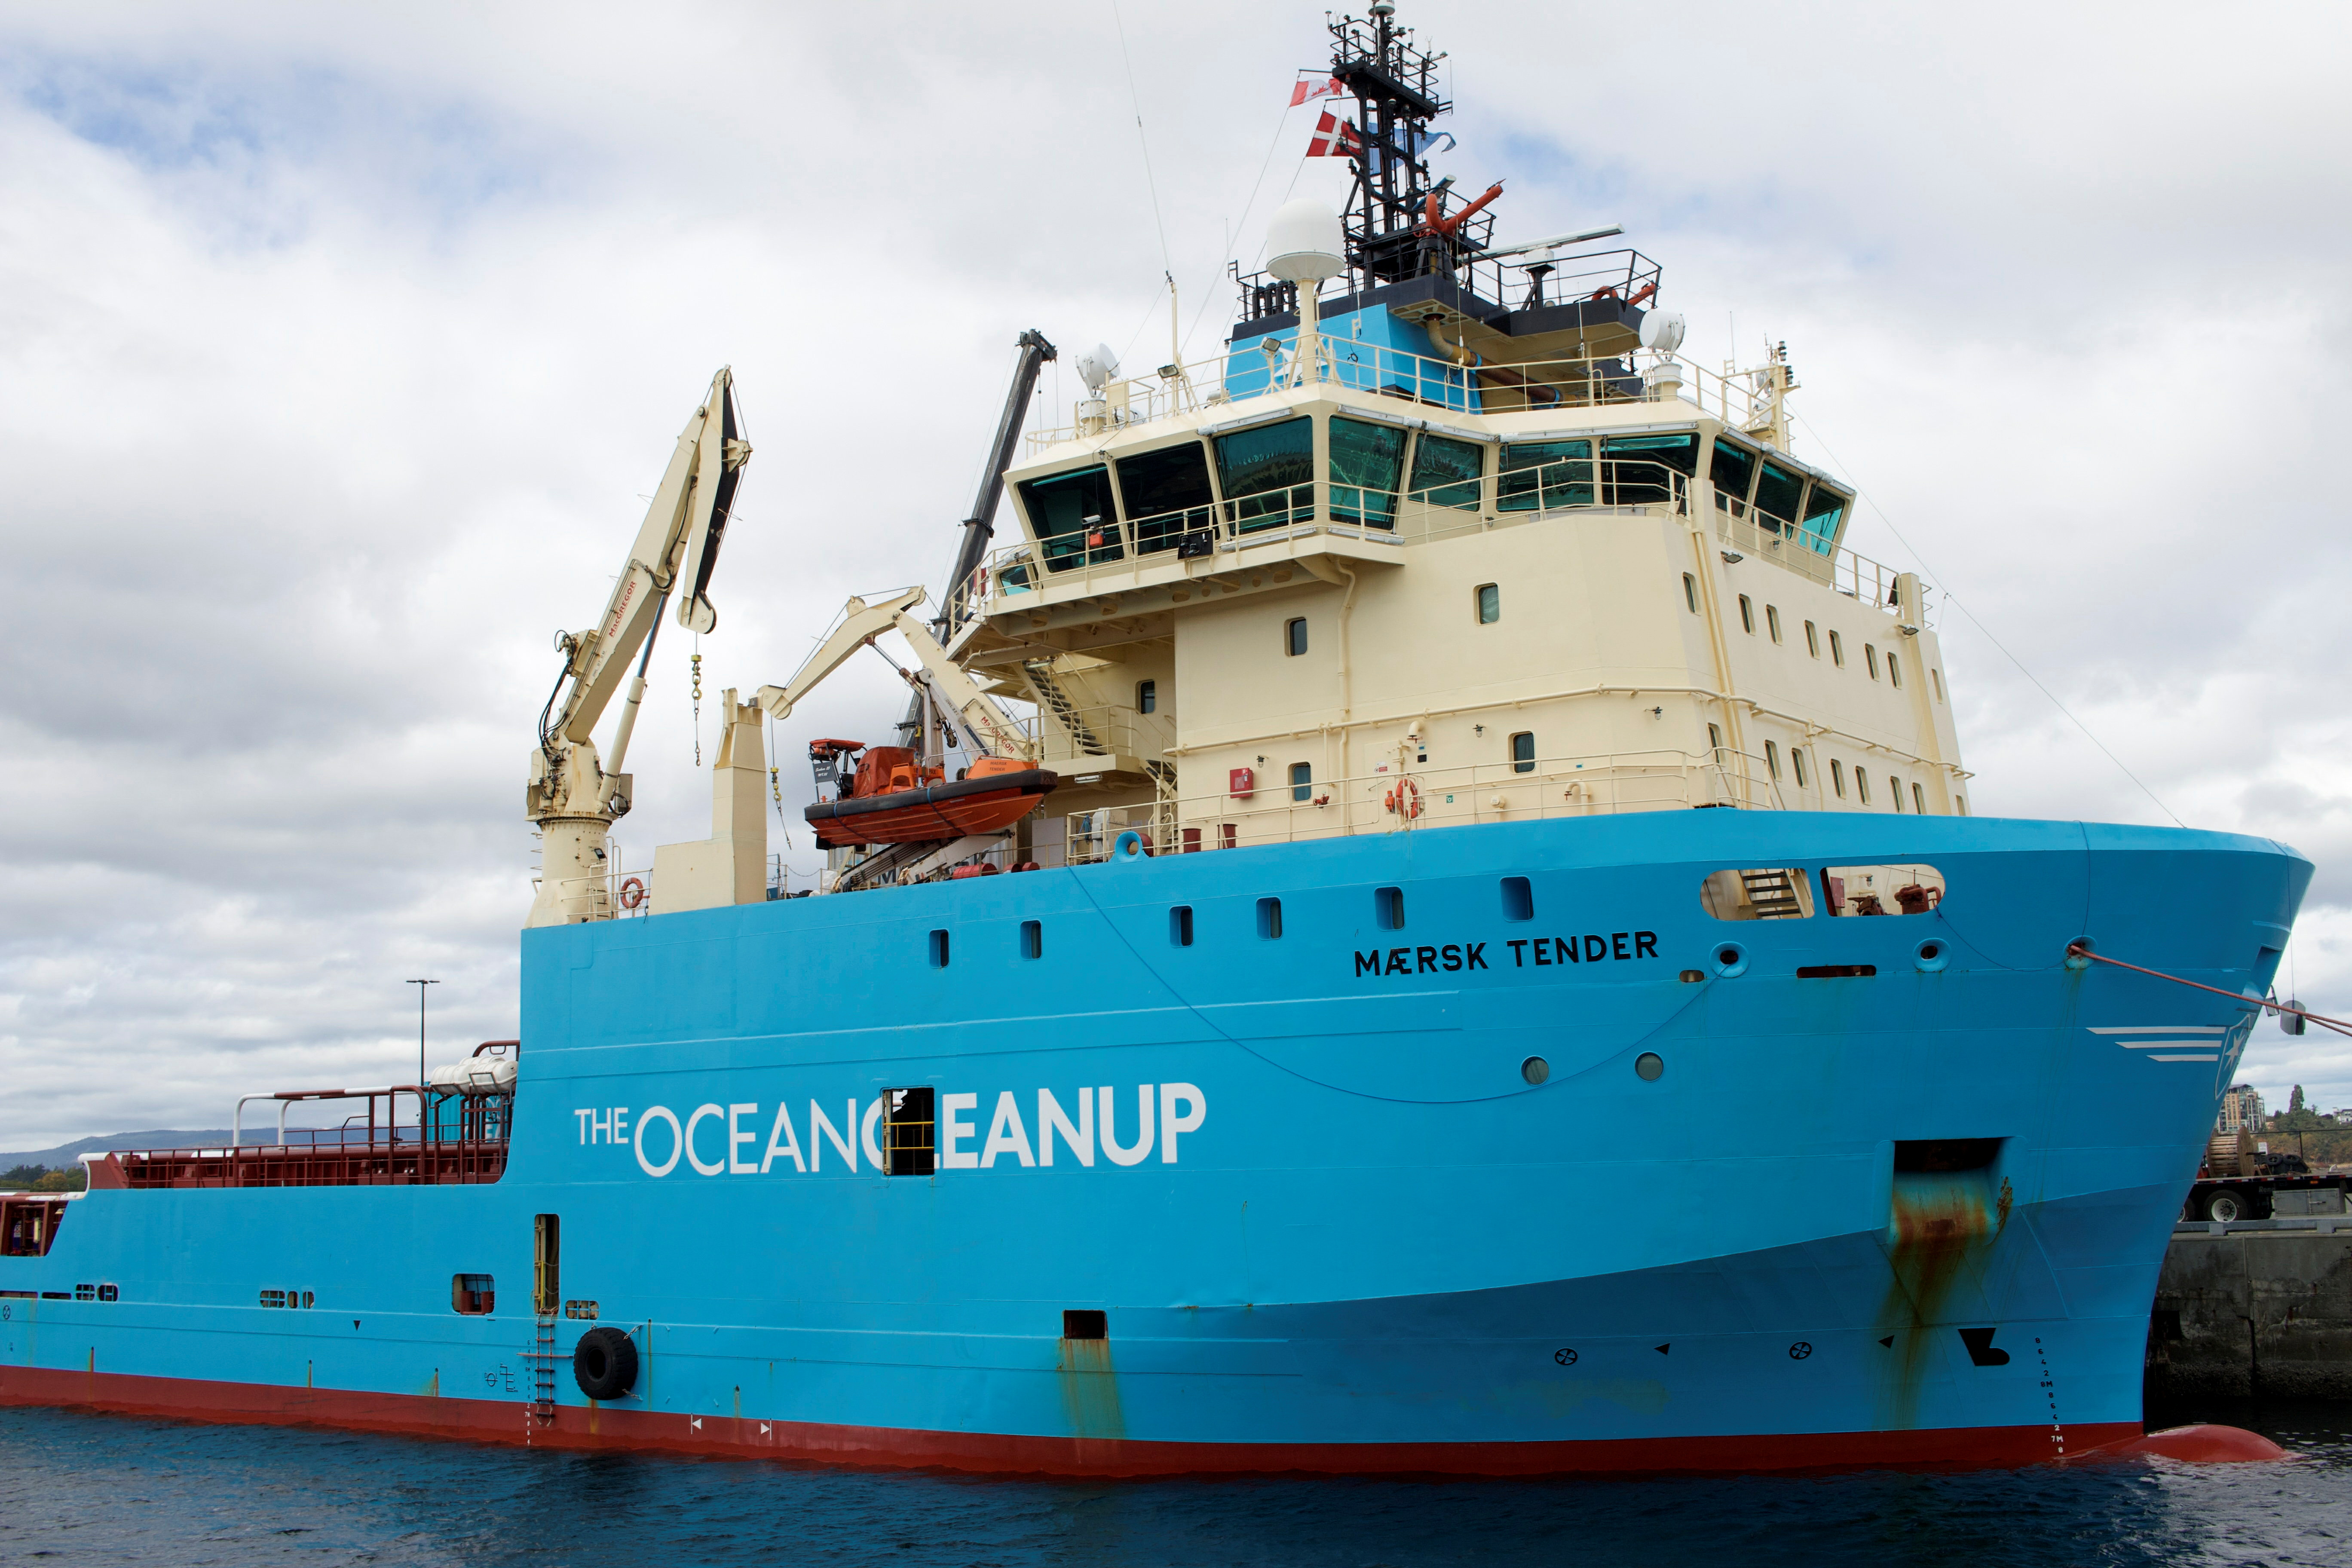 An offshore supply vessel used by non-profit the Ocean Cleanup to remove plastic from the ocean is docked at a port in Victoria, Canada, September 8, 2021. Picture taken September 8, 2021. REUTERS/Gloria Dickie